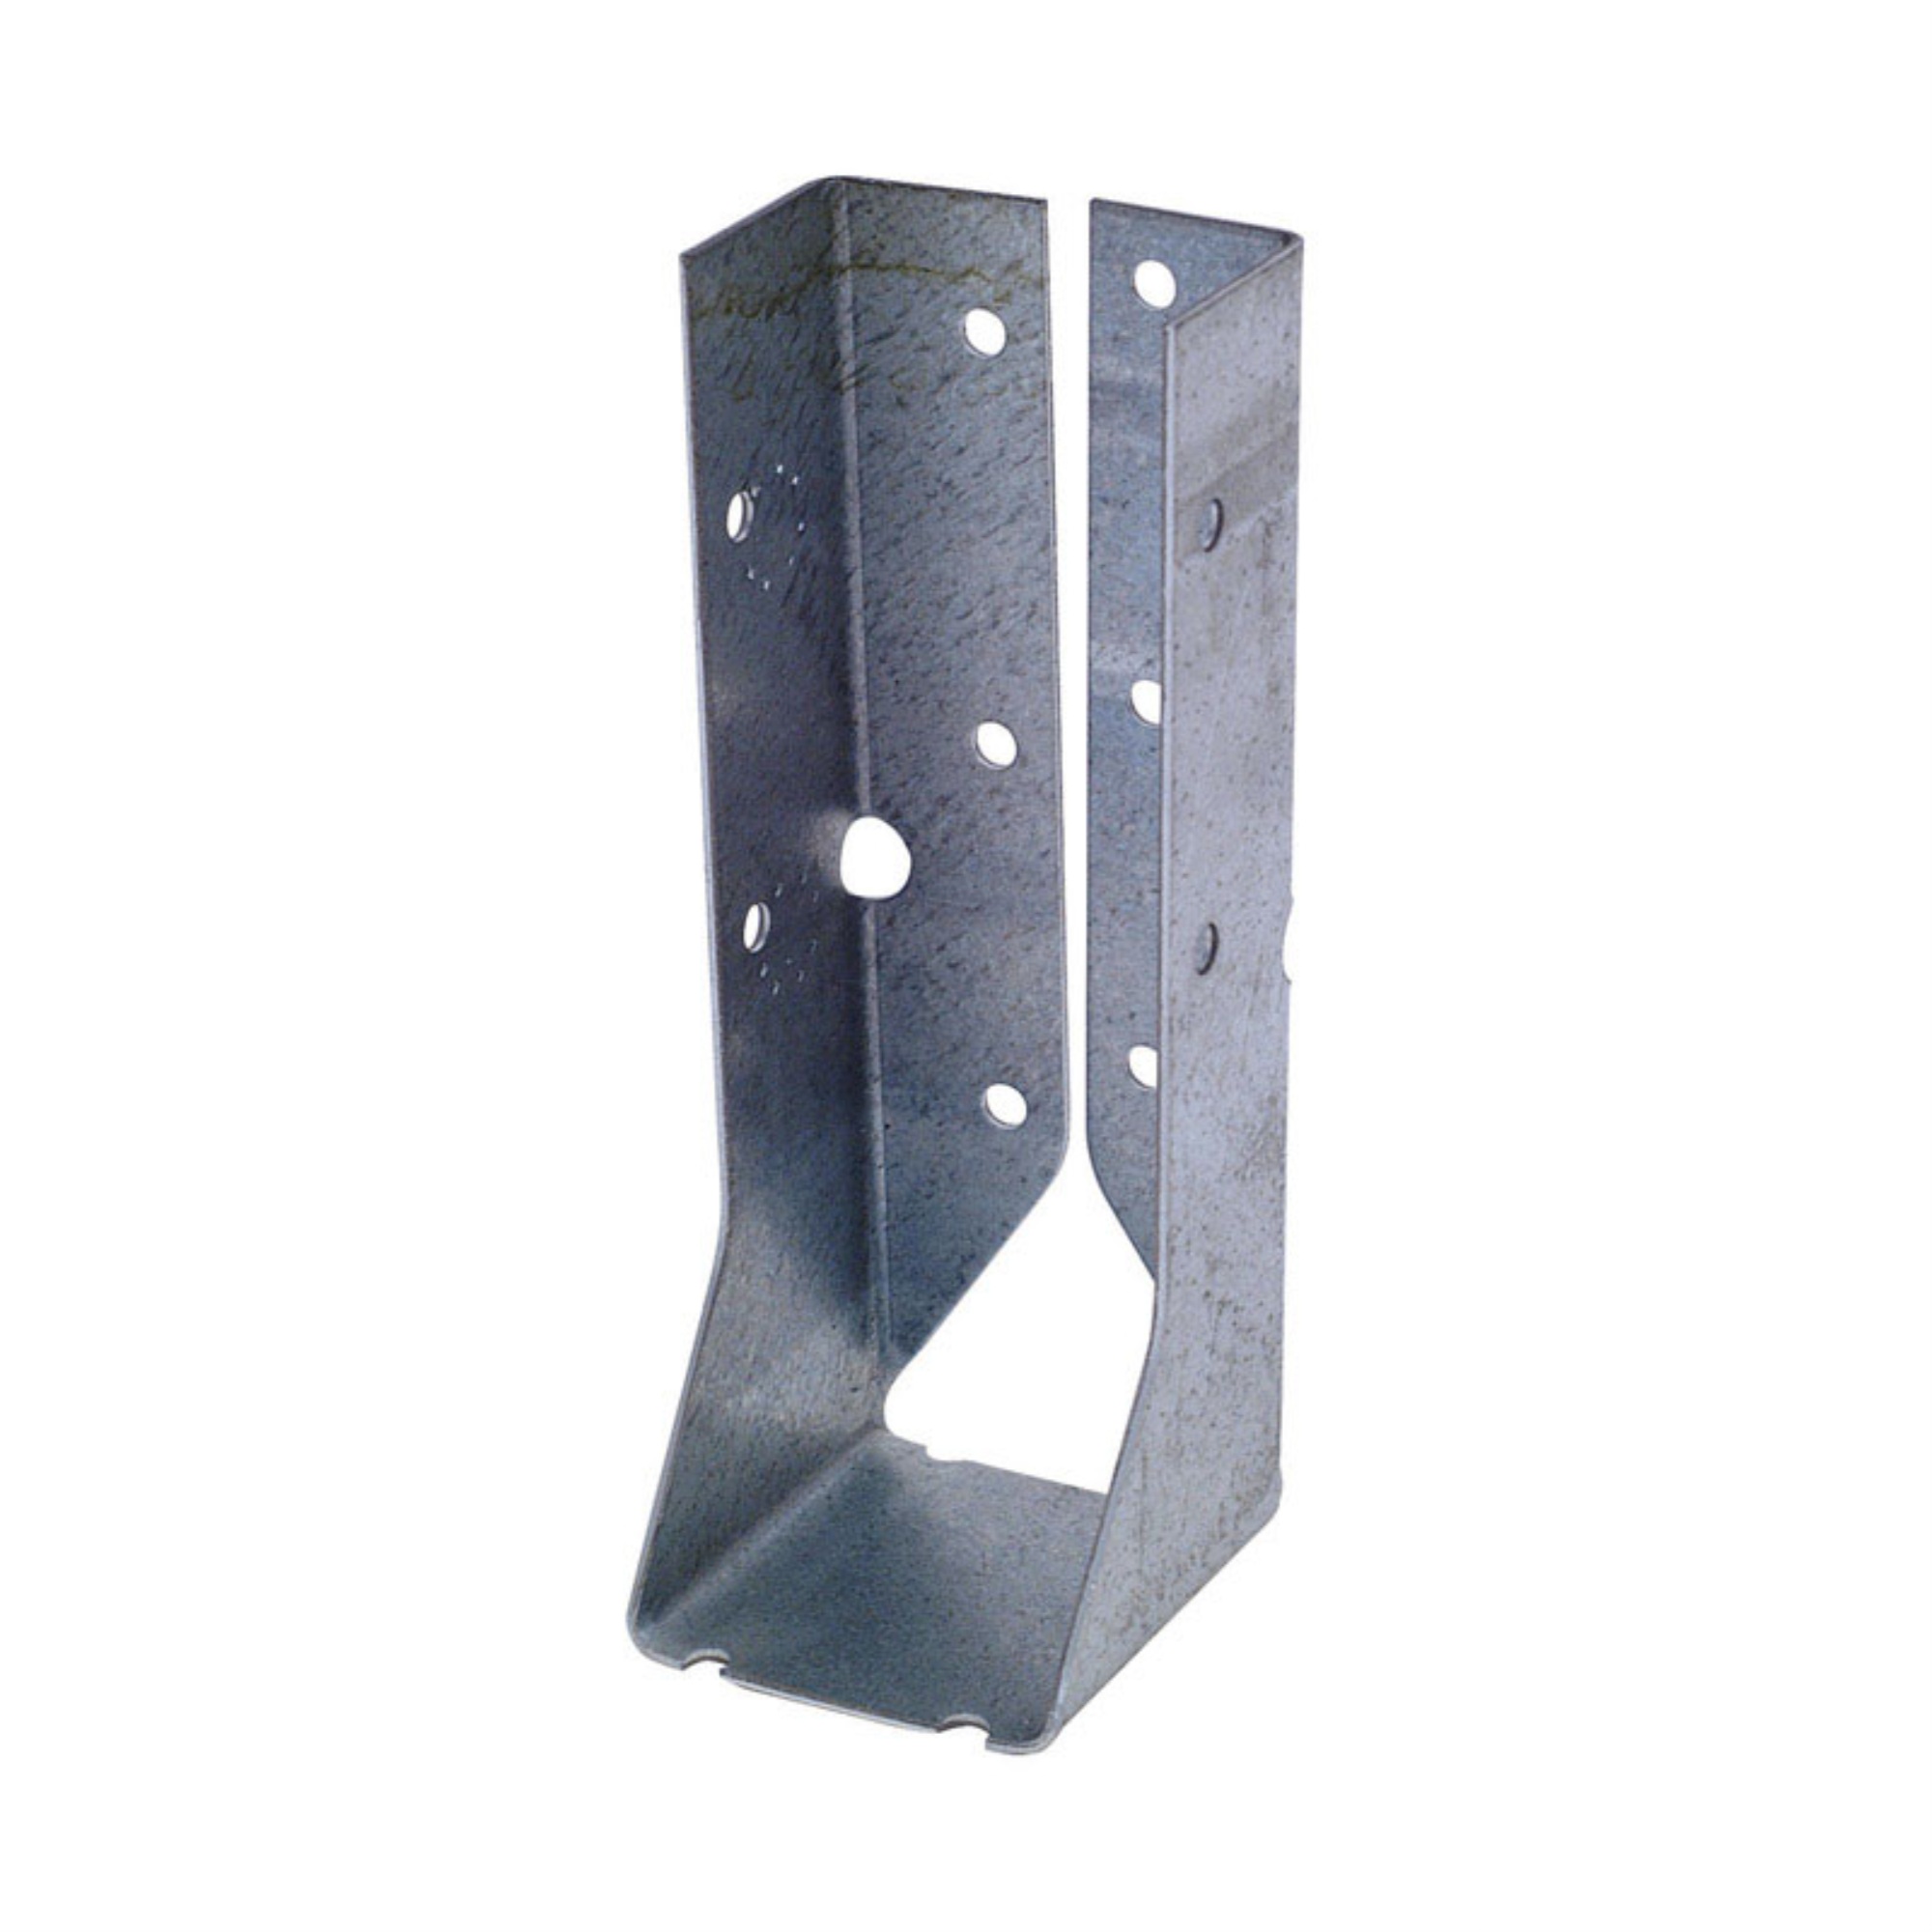 Simpson Strong-Tie JOIST HANGER LUC26Z 2X6 (Pack of 25)